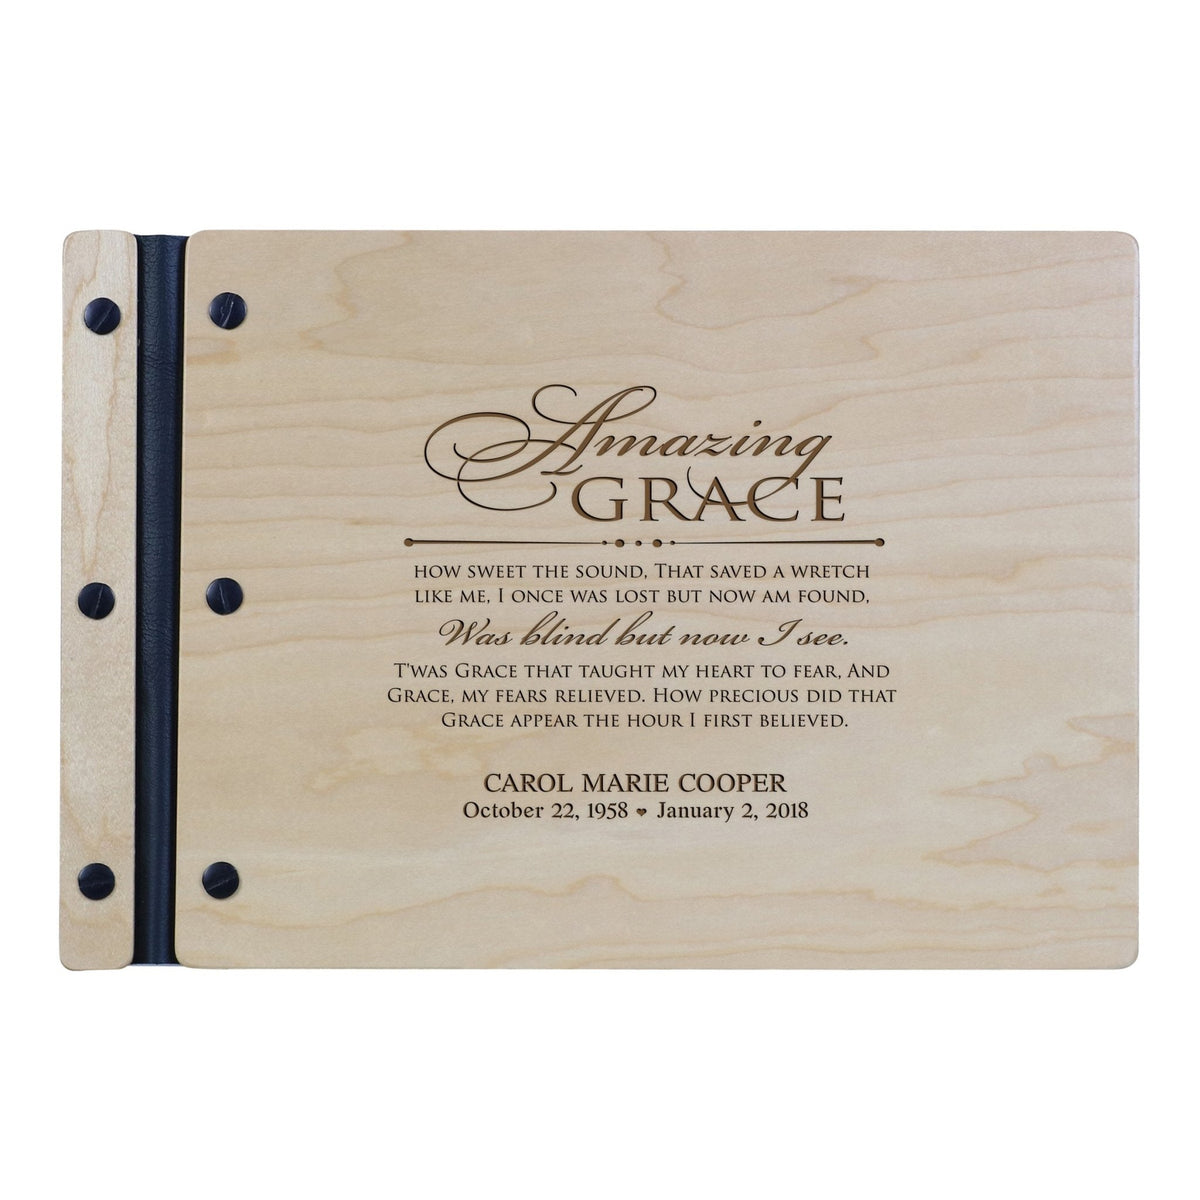 Personalized Memorial Guest Book - Amazing Grace - LifeSong Milestones